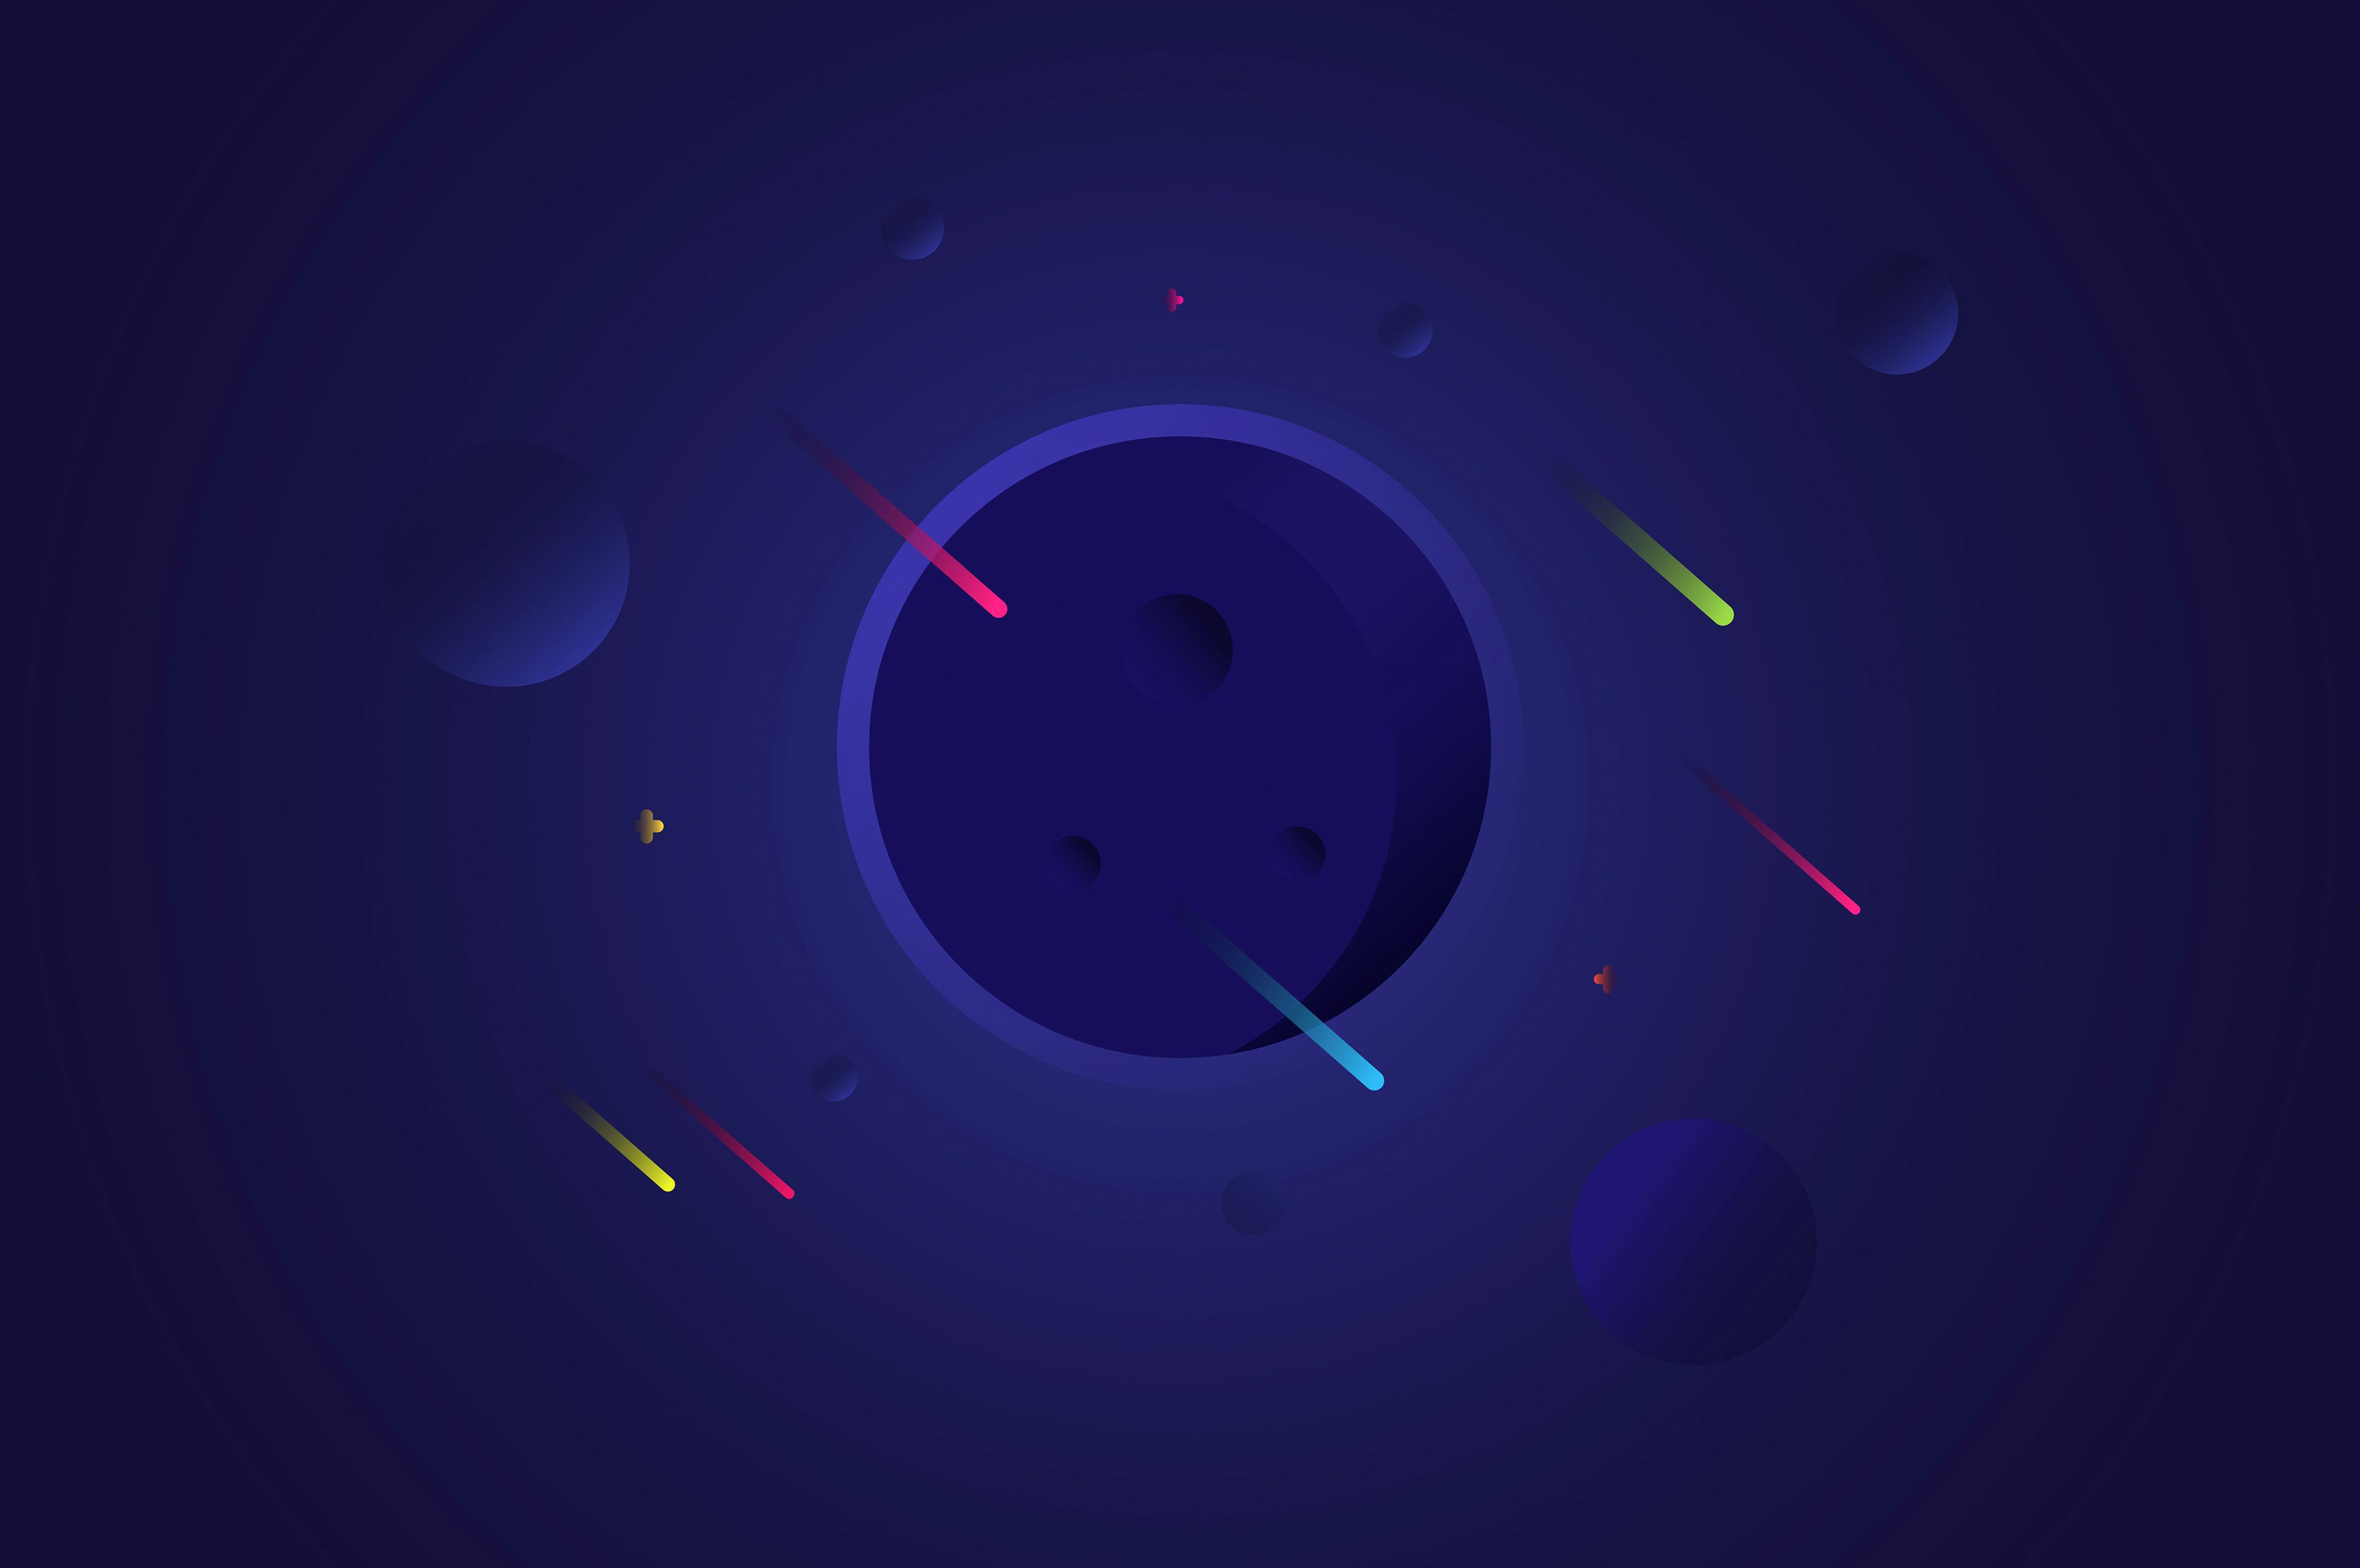 Wallpaper Planets, Blue, Falling stars, Minimal, 4K, Space,. Wallpaper for iPhone, Android, Mobile and Desktop